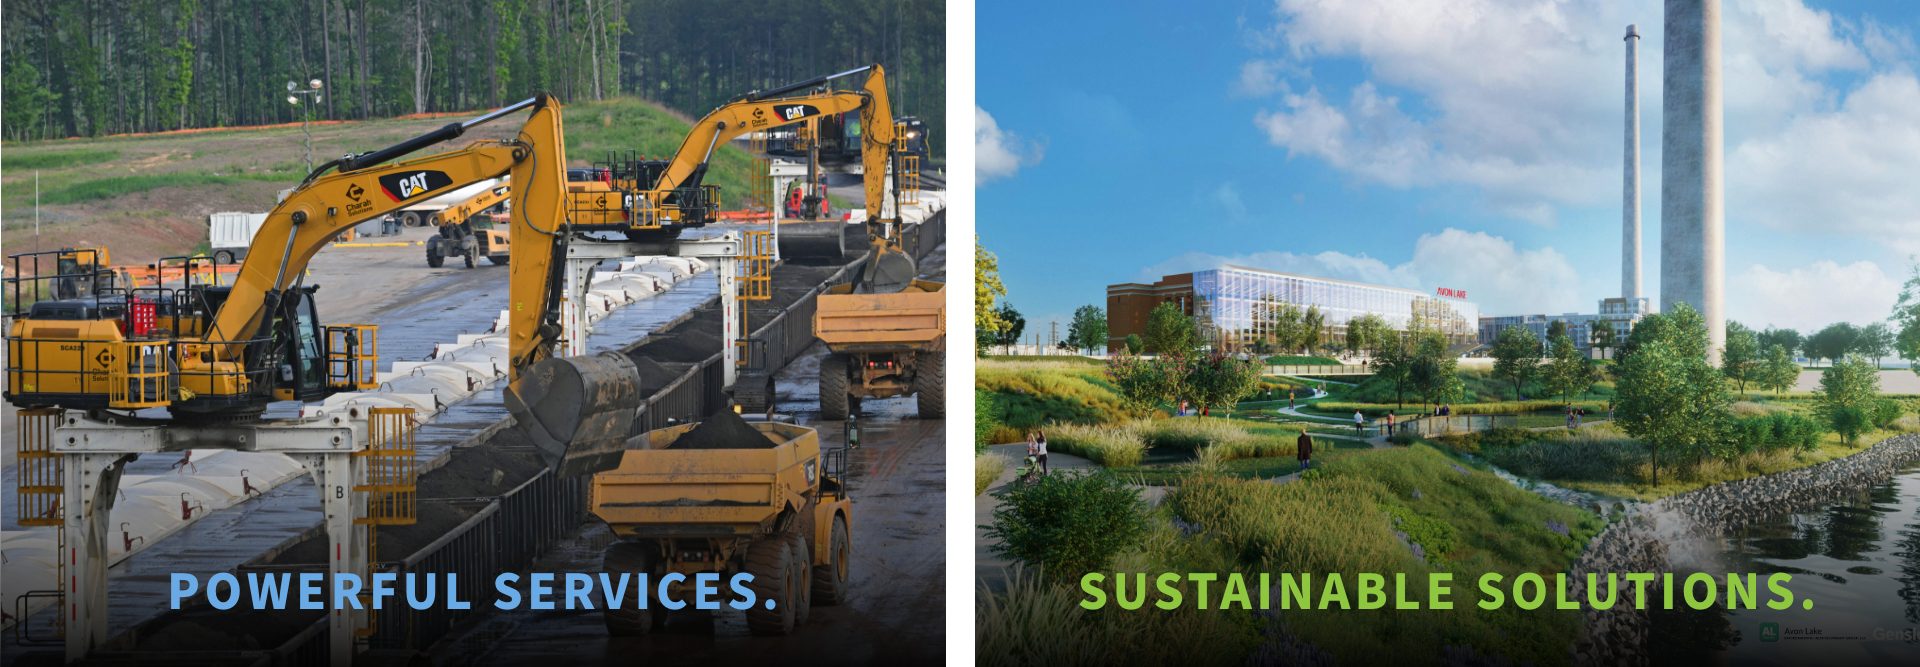 Powerful Services & Sustainable Solutions